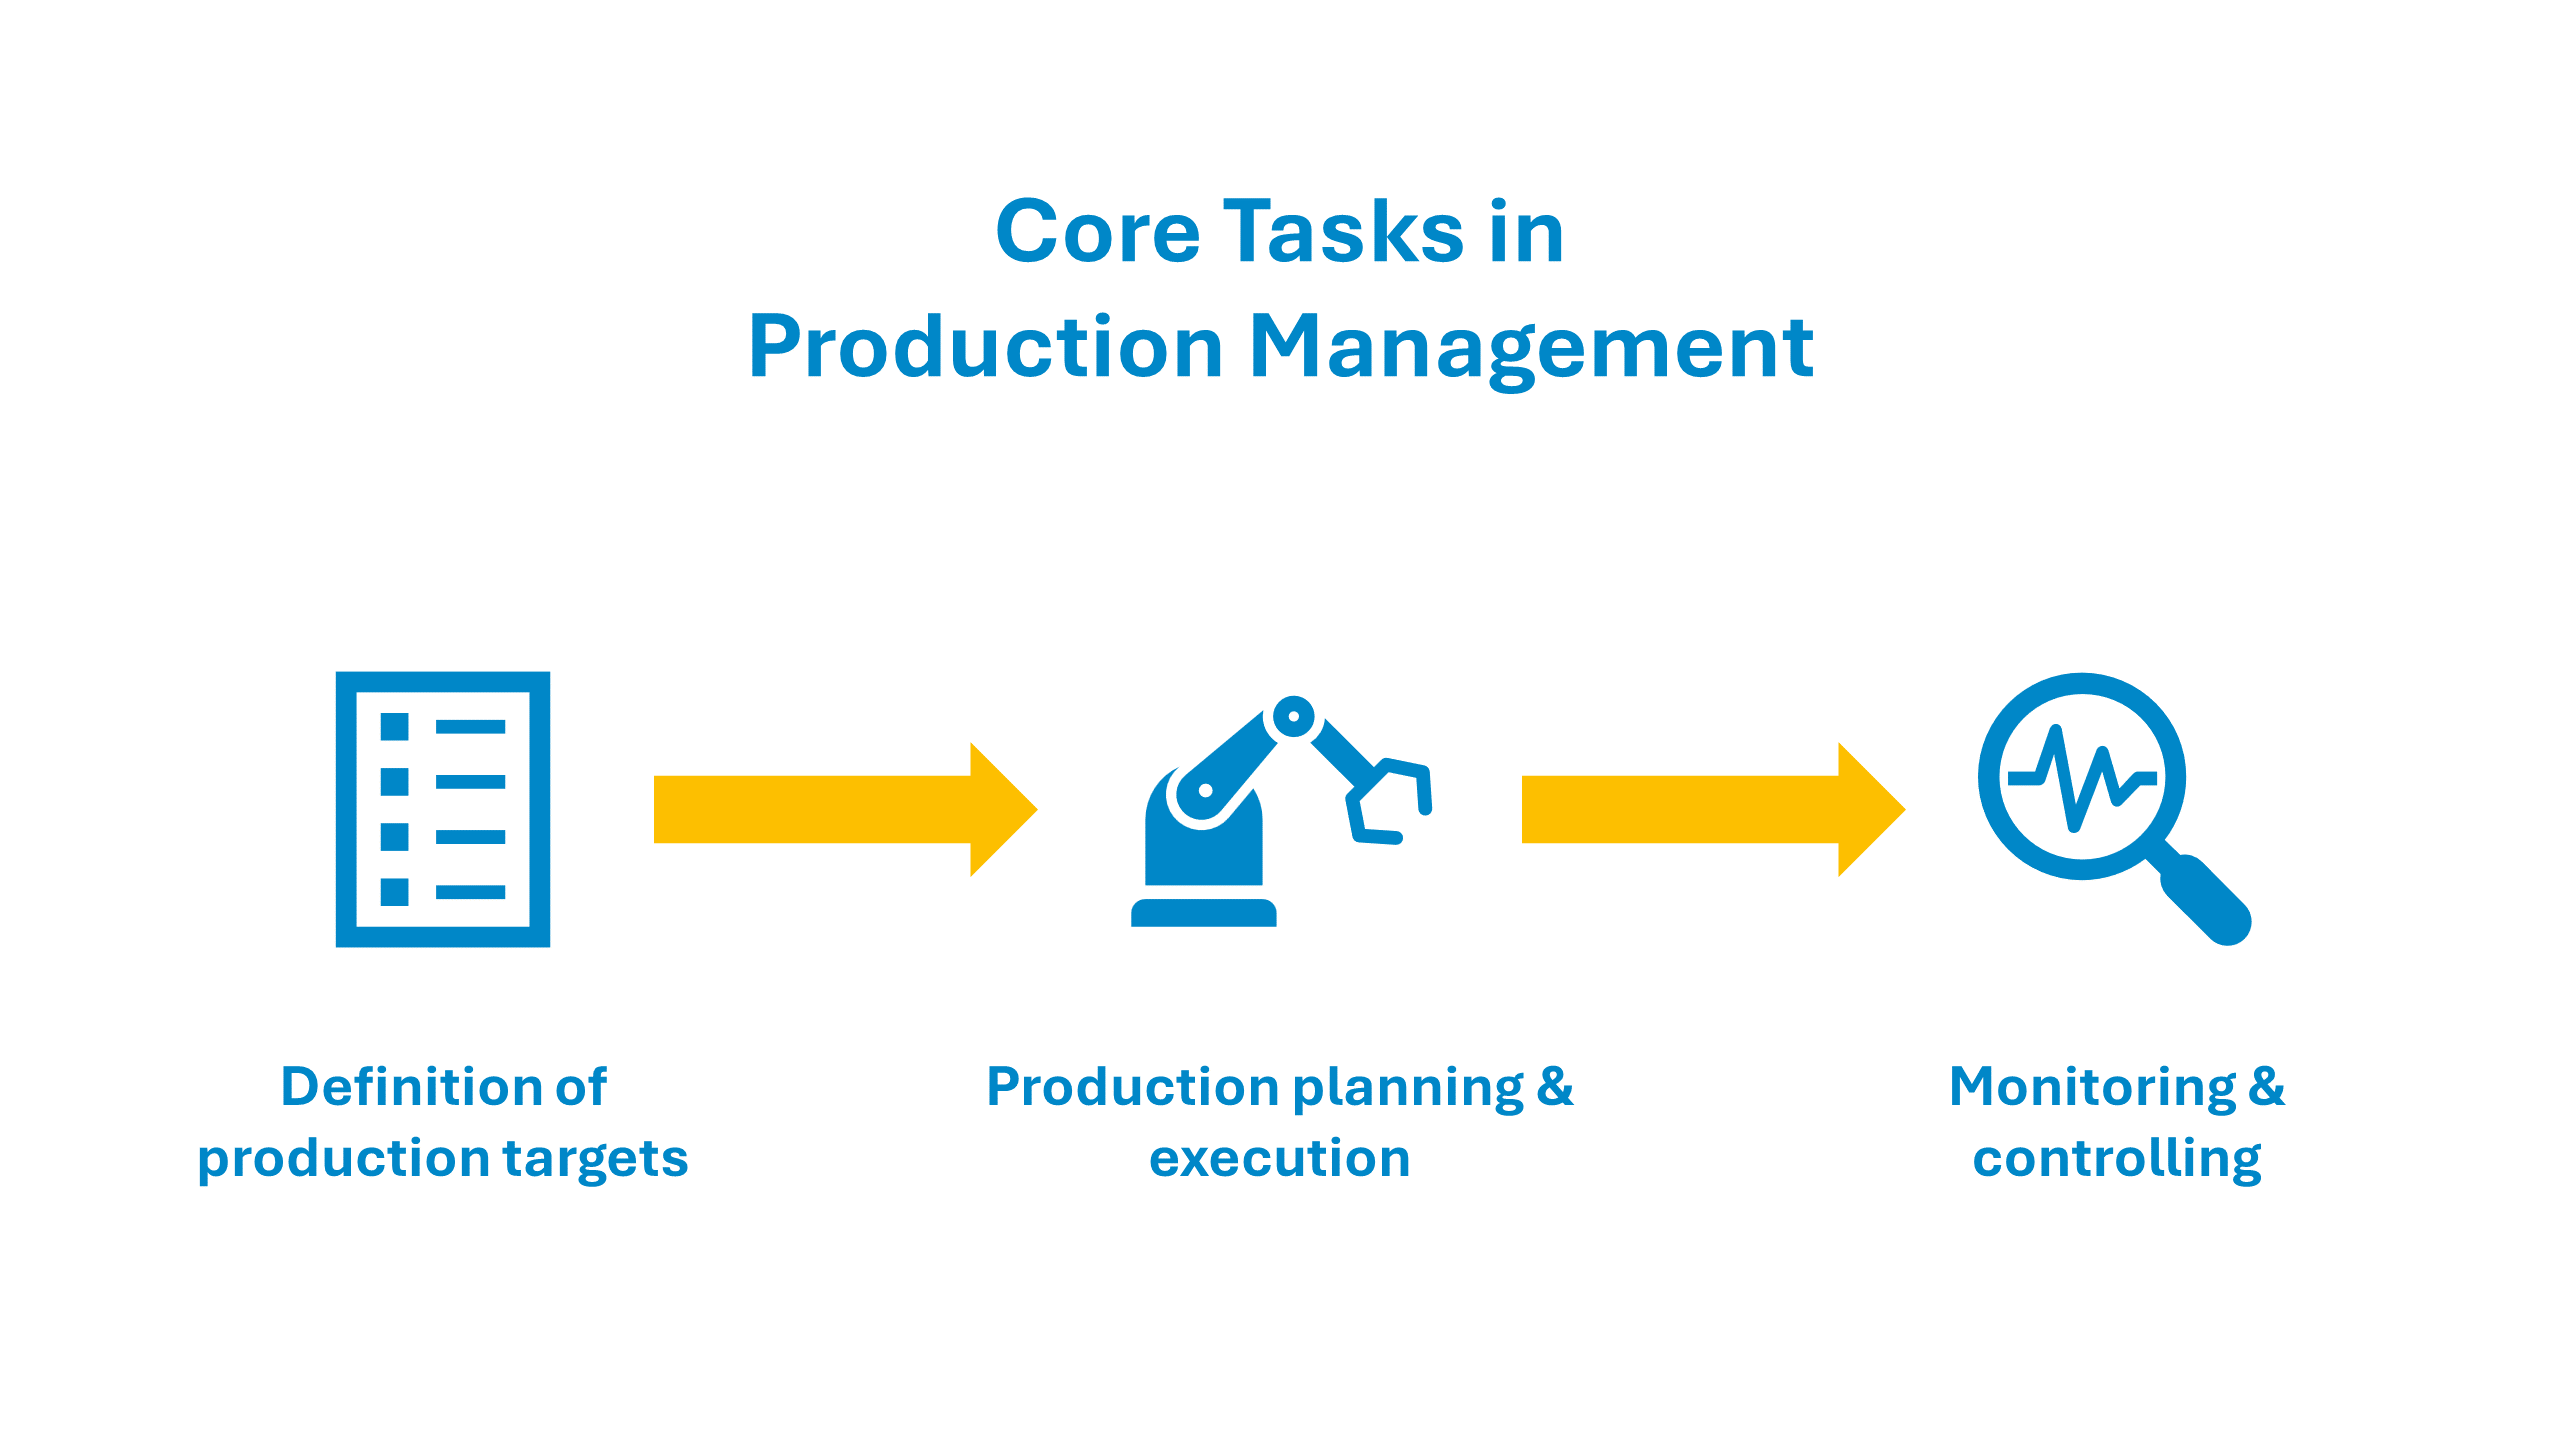 Core tasks in production management